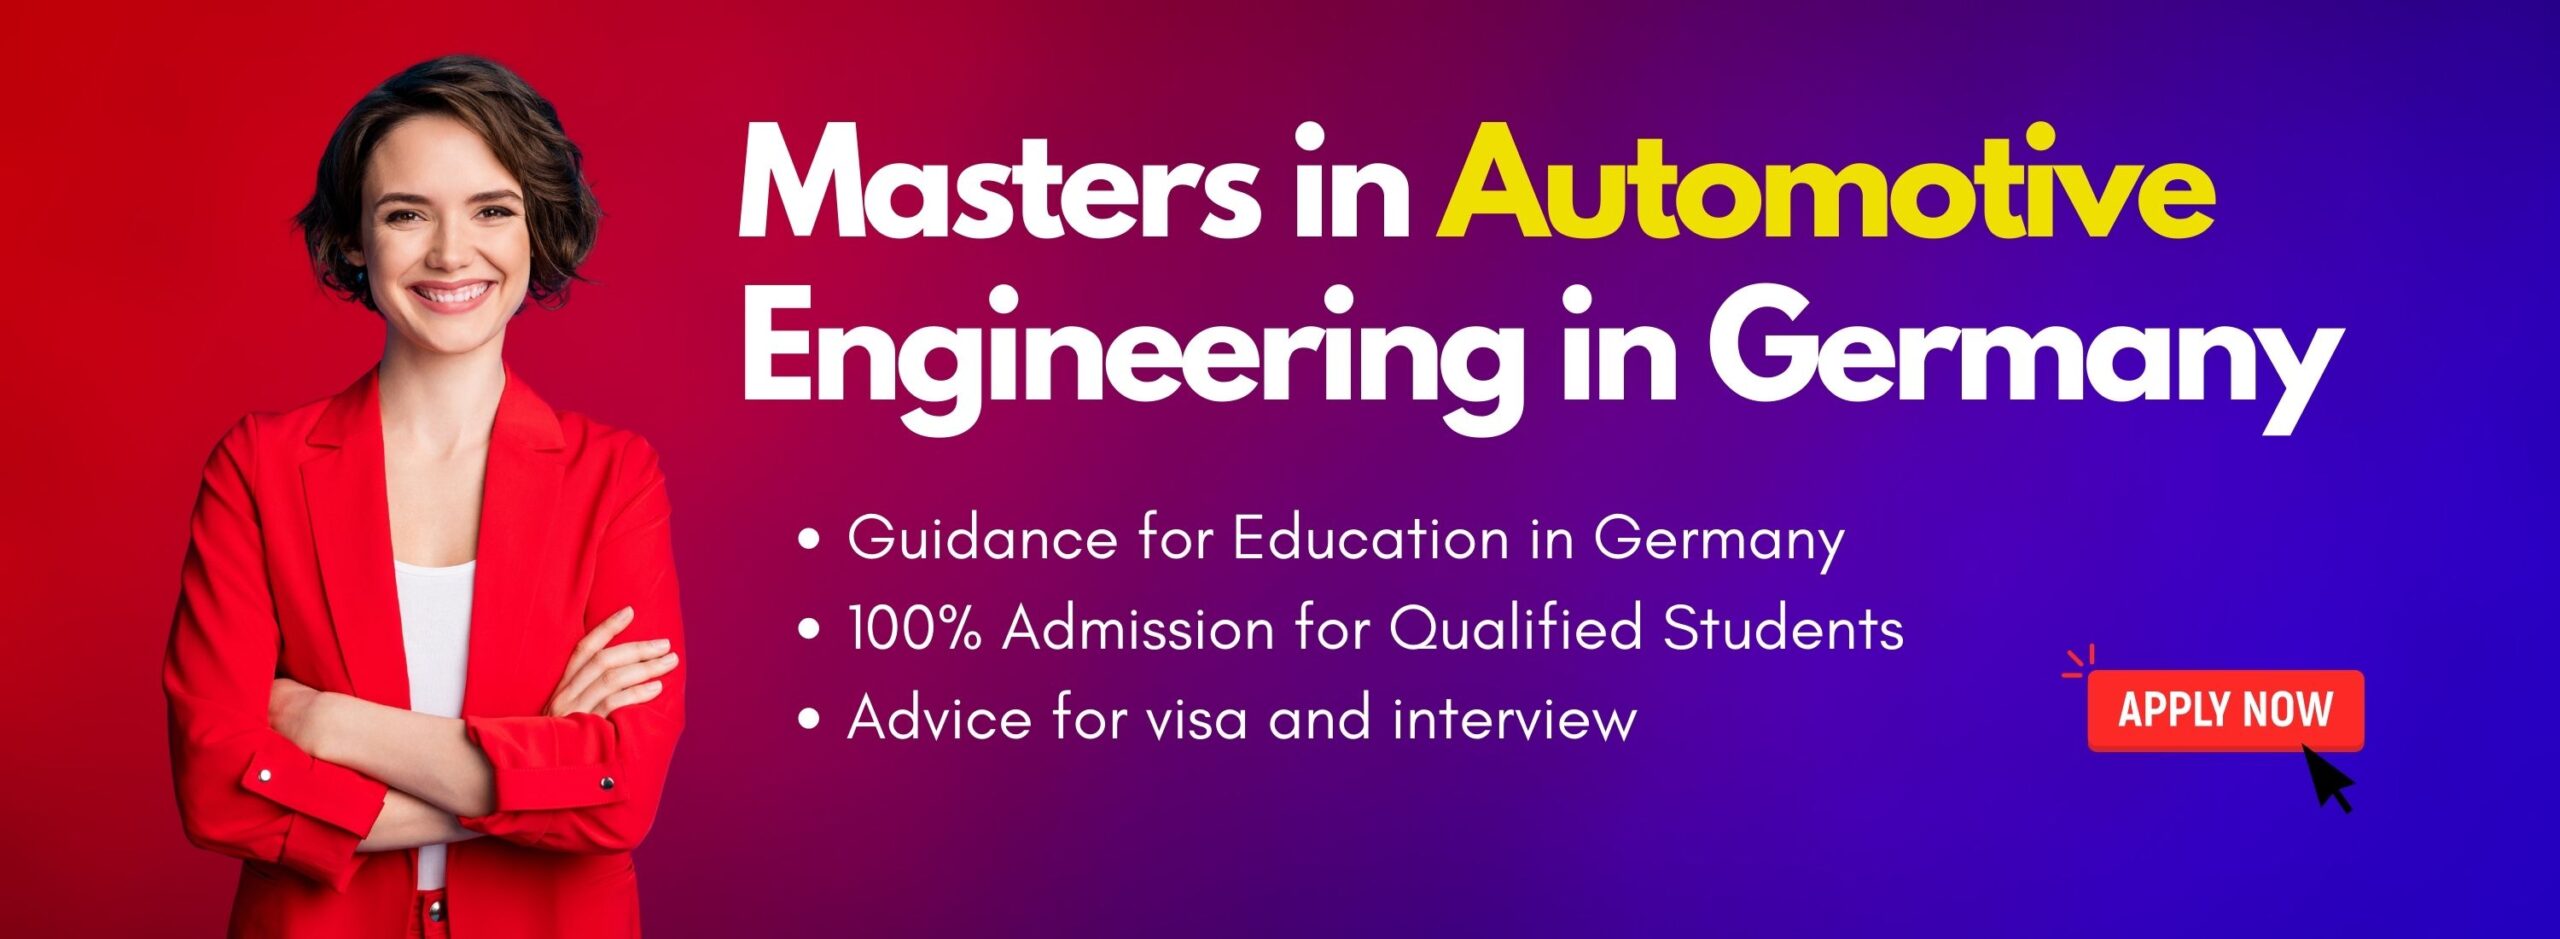 Masters in Automotive Engineering in Germany - Know More